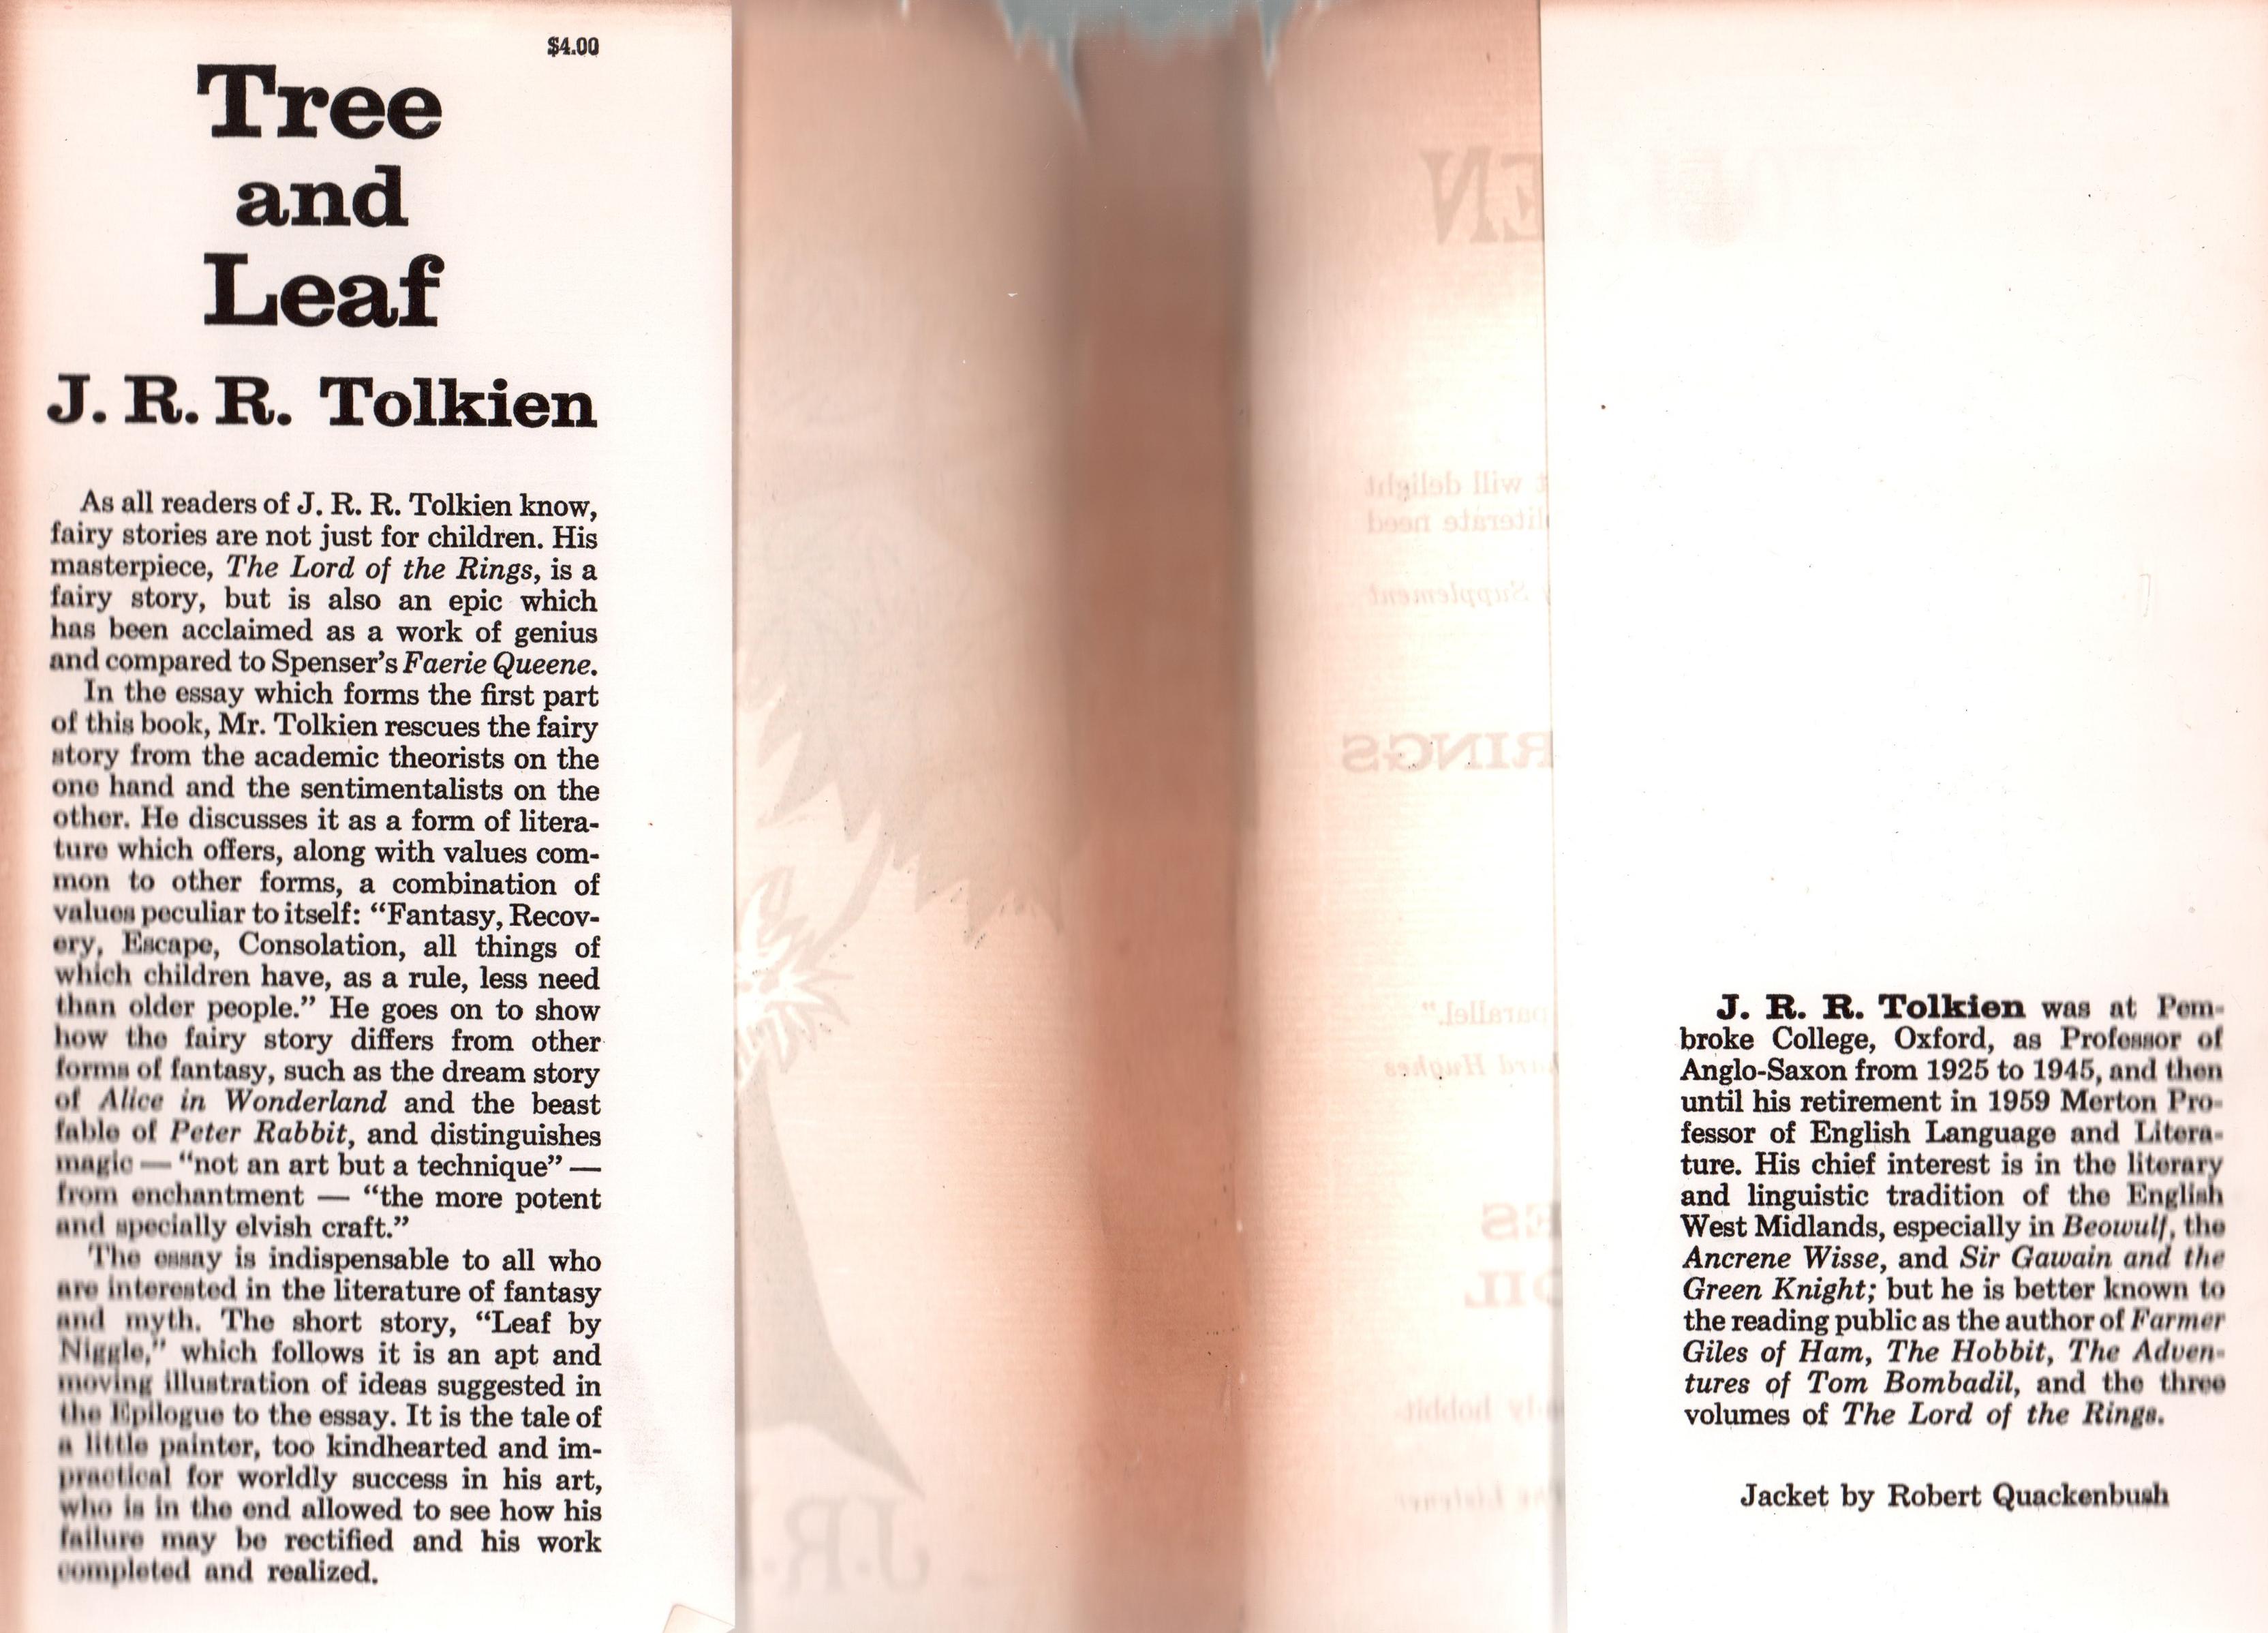 Paper J. R. R. Tolkien's Tree and Leaf, 1965 For Sale